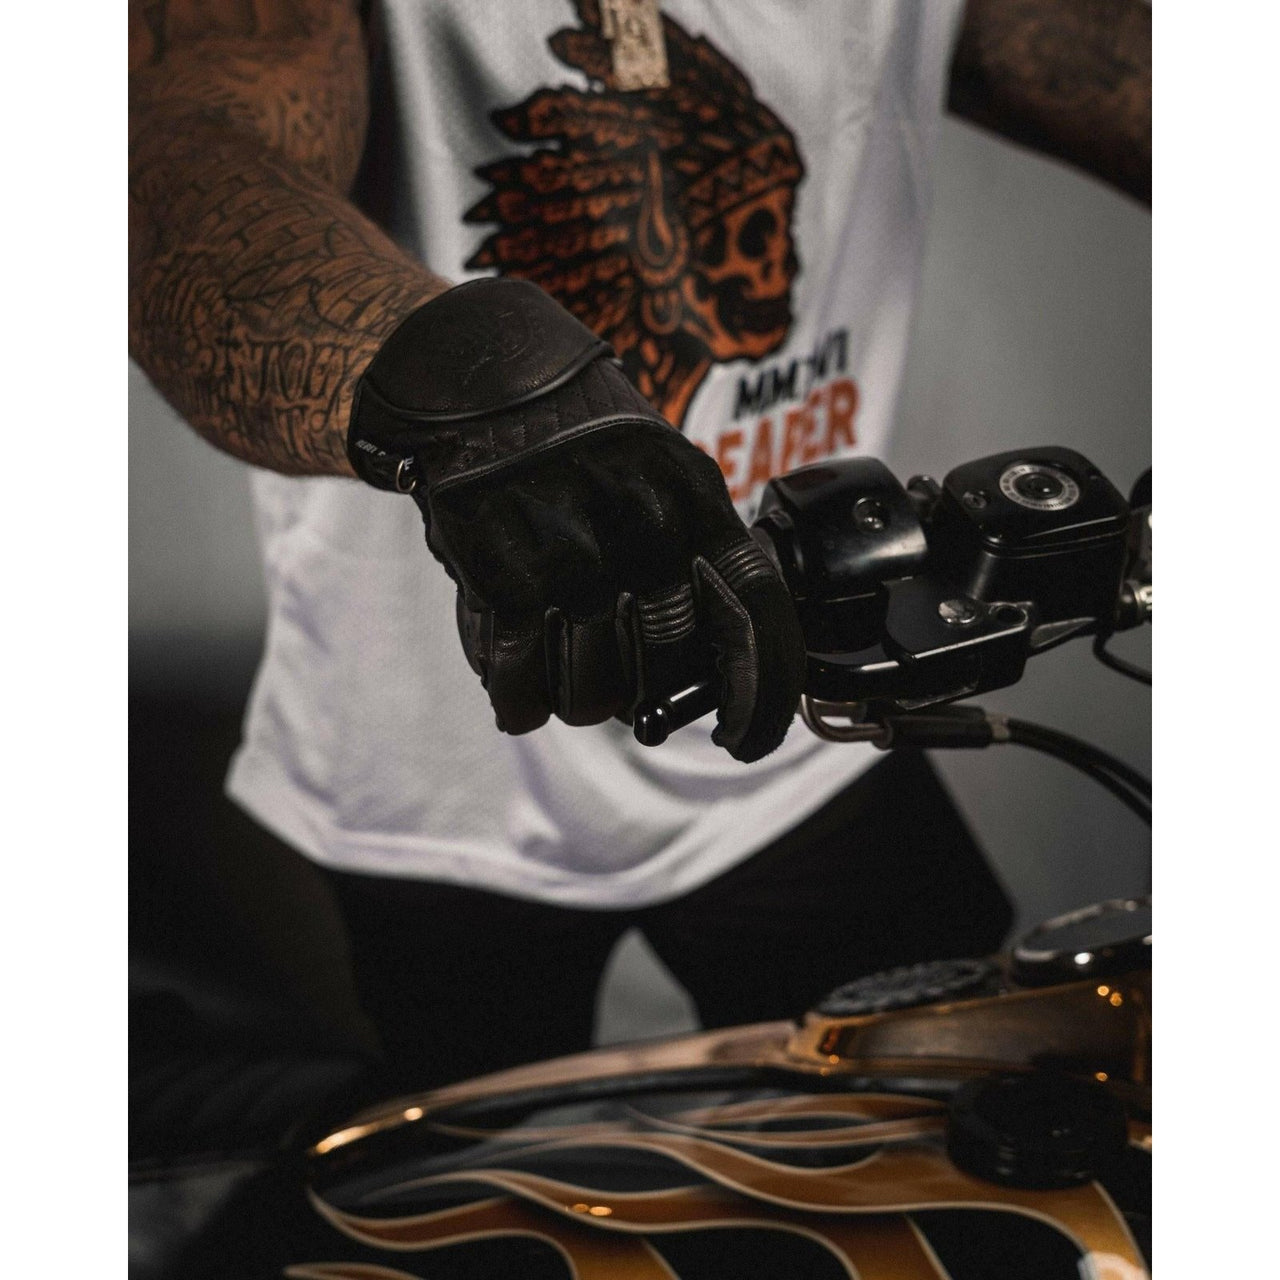 Leather Motorcycle Riding Gloves - Modern Roper - Black Suede